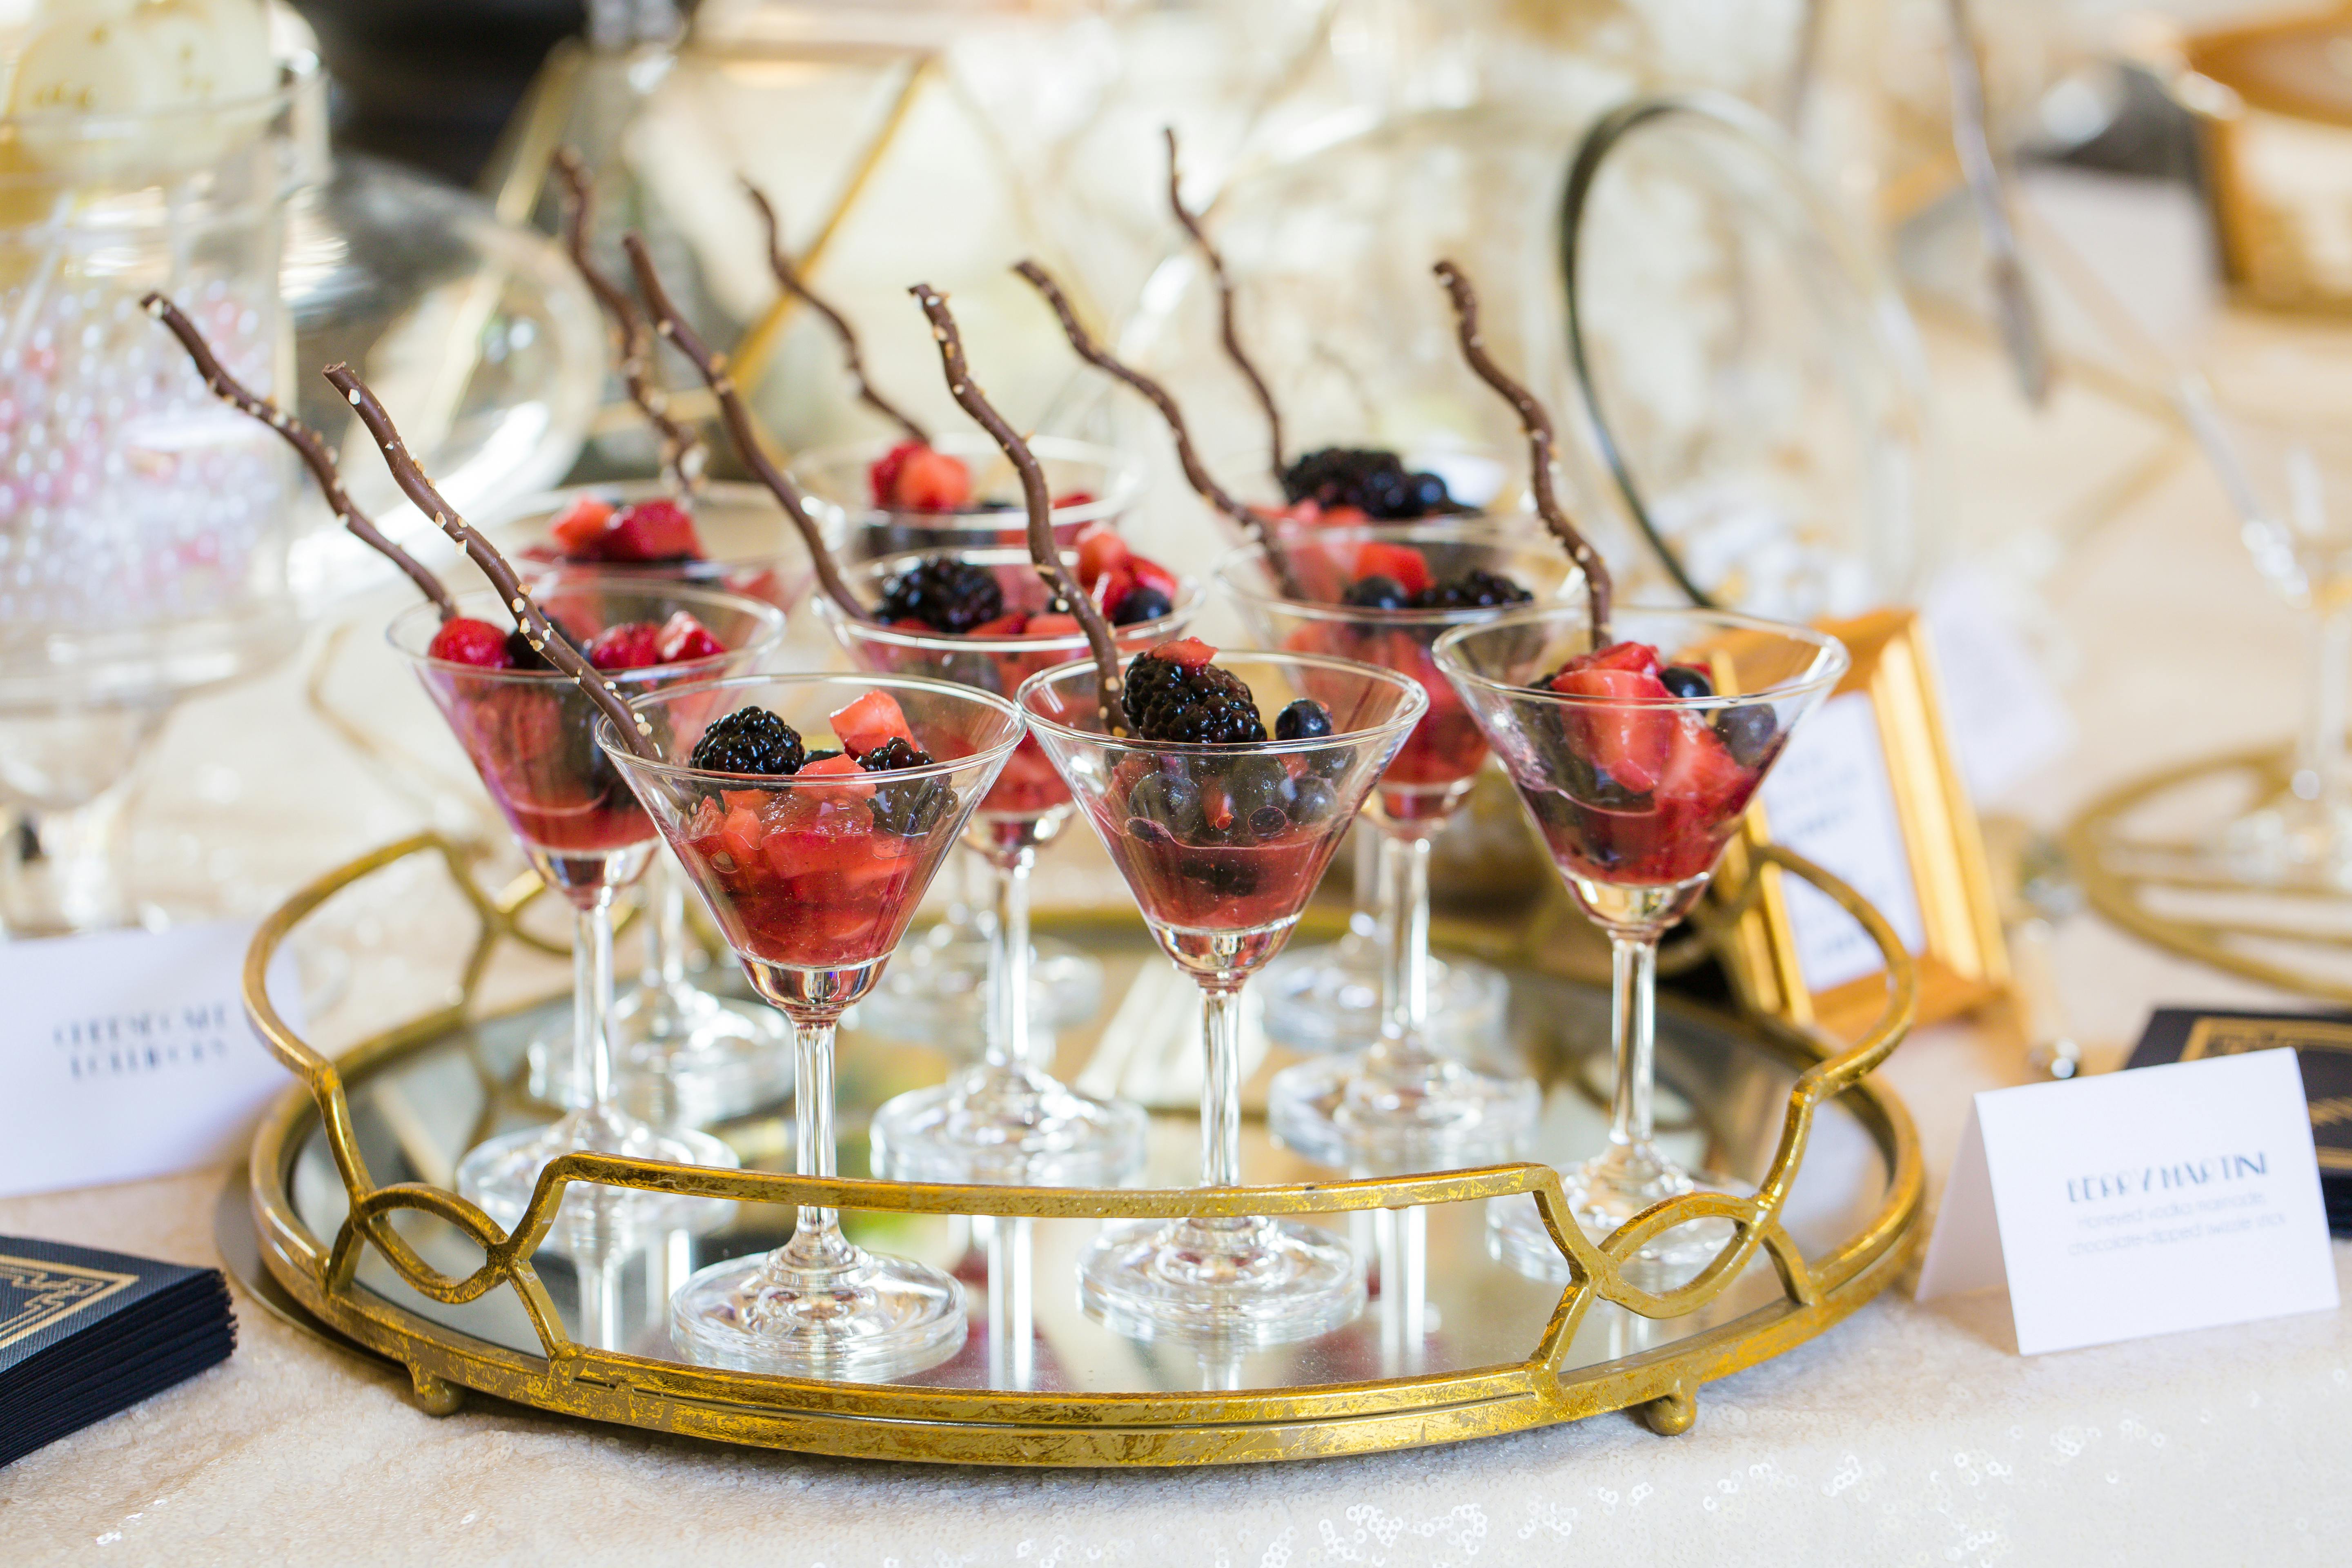 Fruity Desserts in Martini Glasses at a Gatsby Themed Bridal Shower | PartySlate